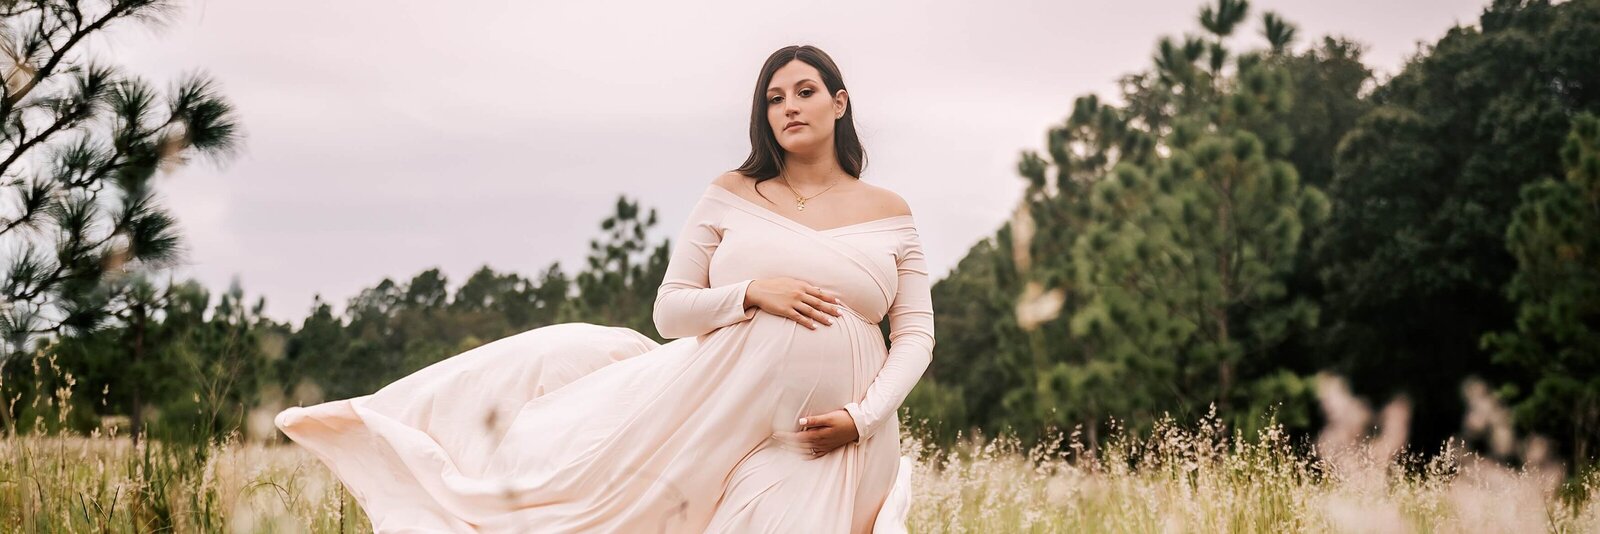 pregnant woman in cream dress standing in a field of wildflowers with her dress blowing in the wind near Orlando, FL